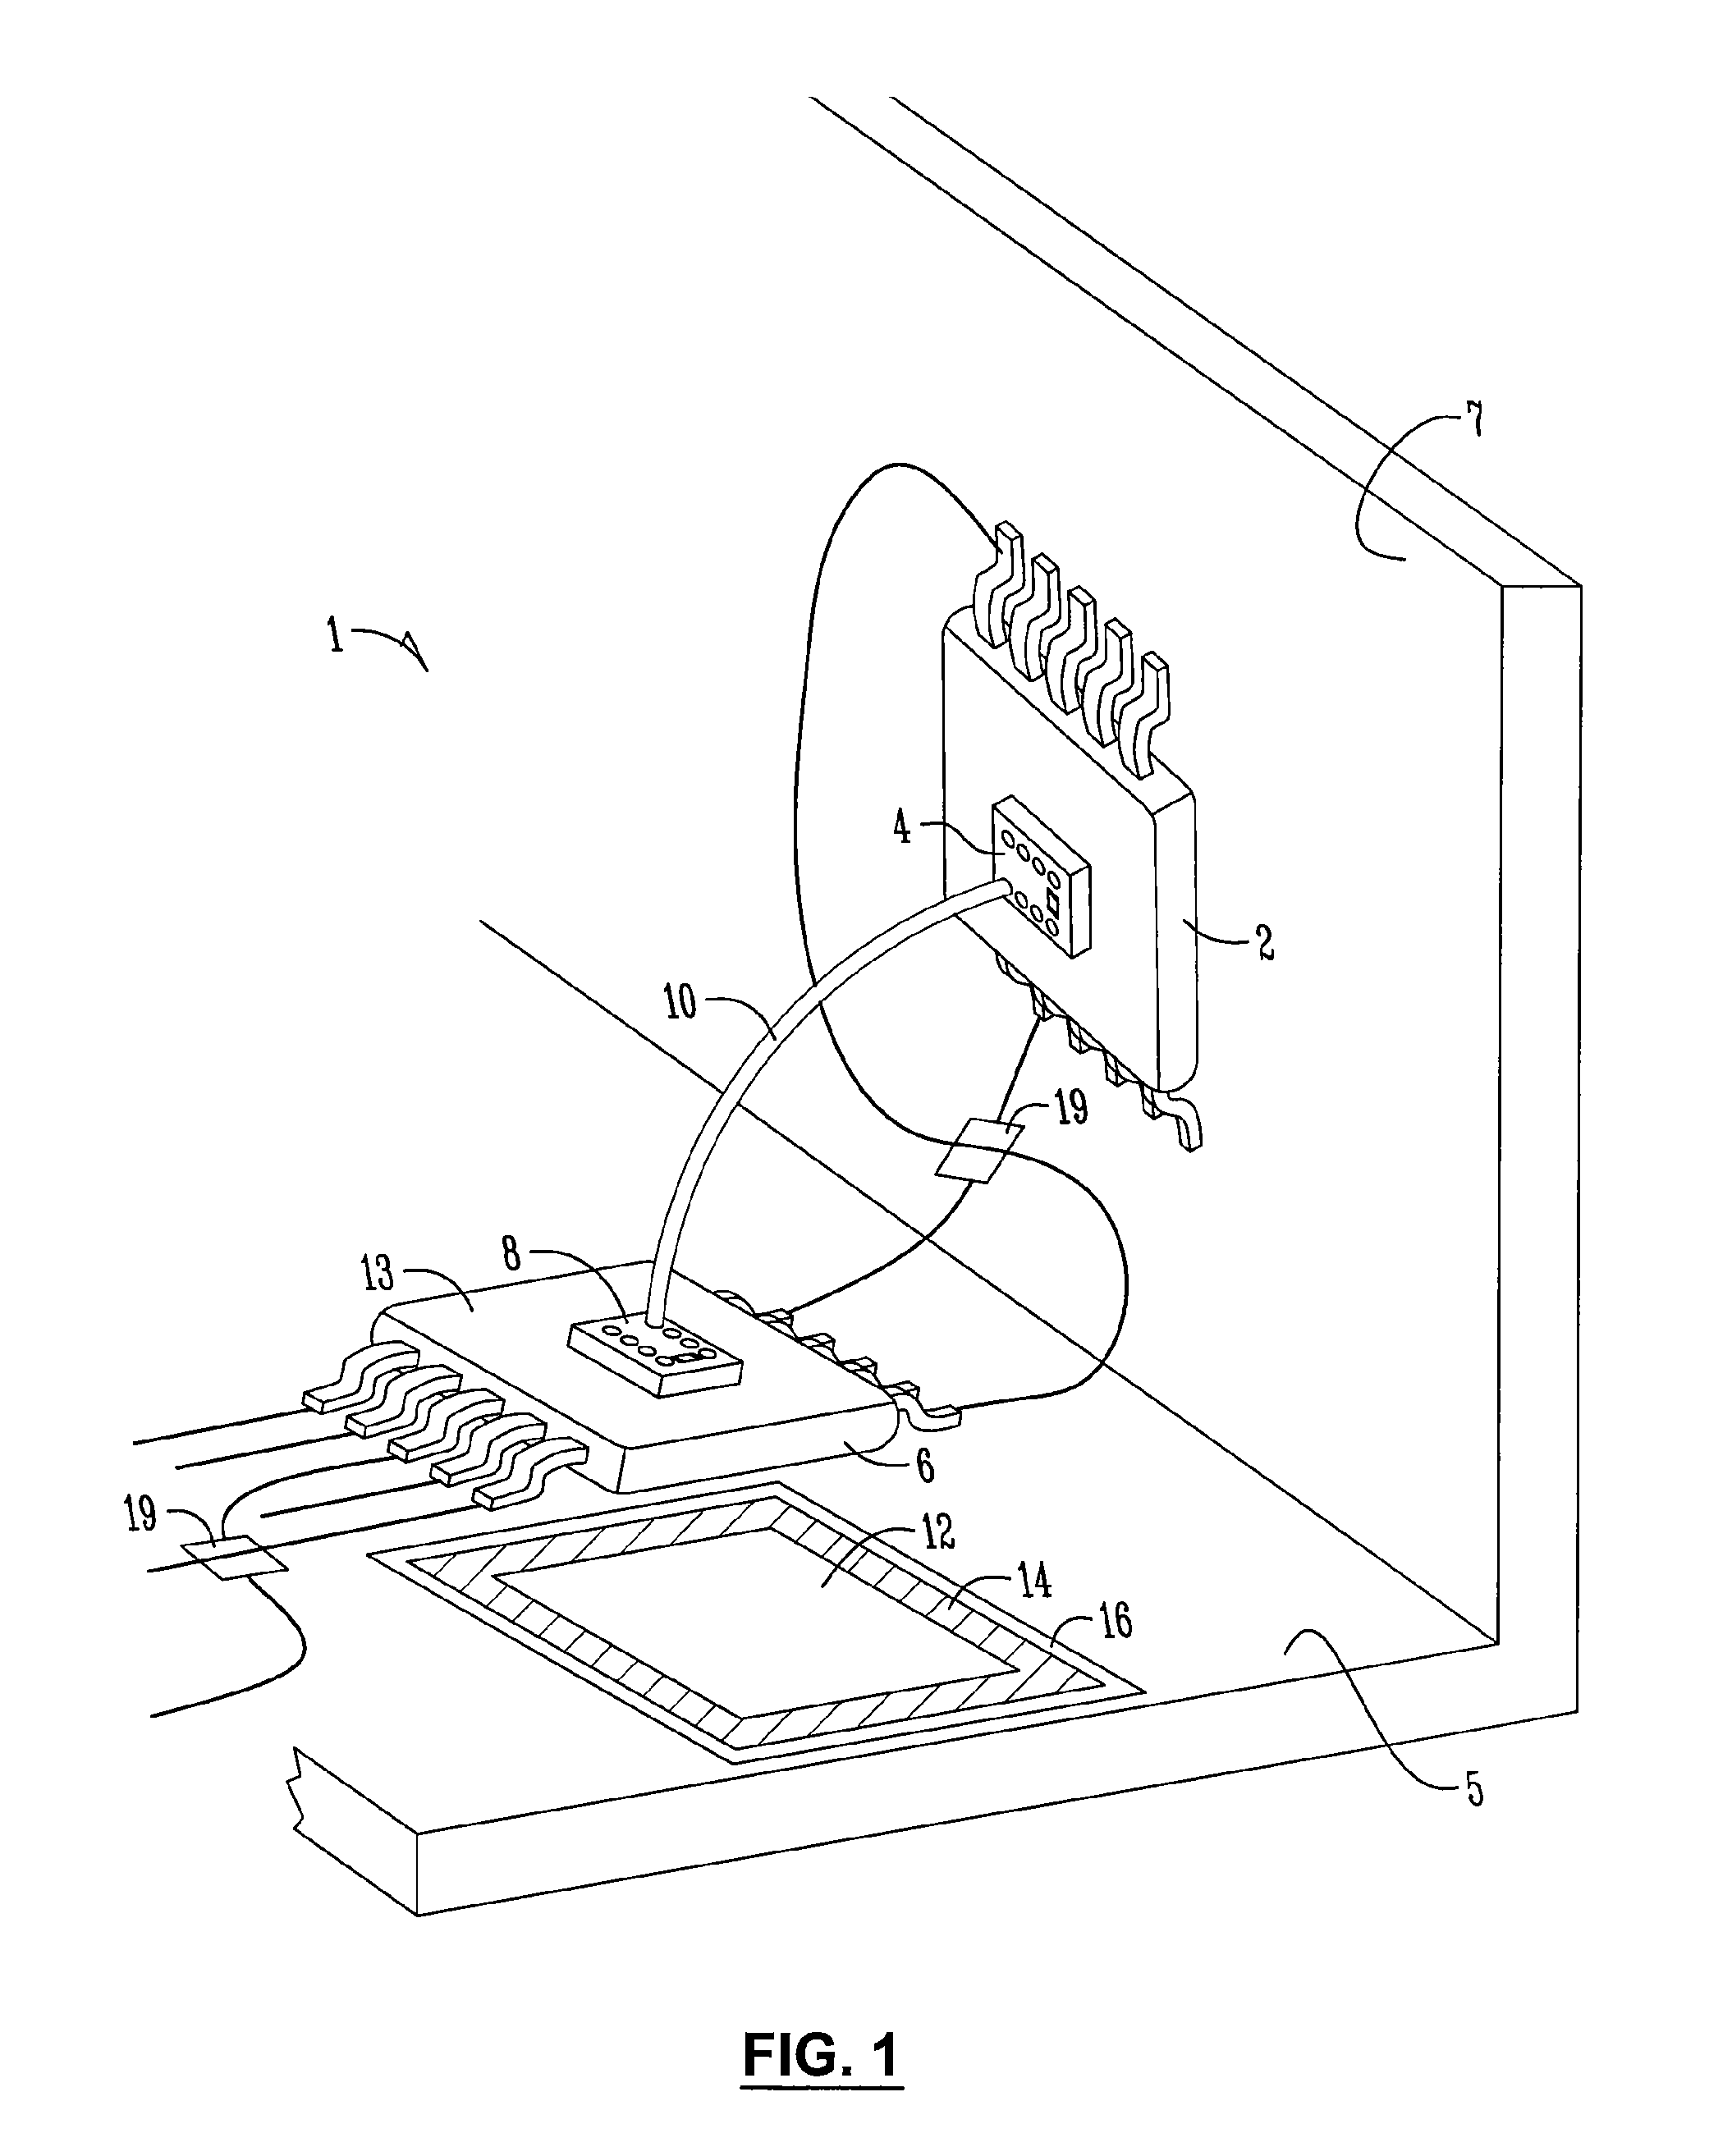 Method for manufacturing 3D circuits from bare die or packaged IC chips by microdispensed interconnections